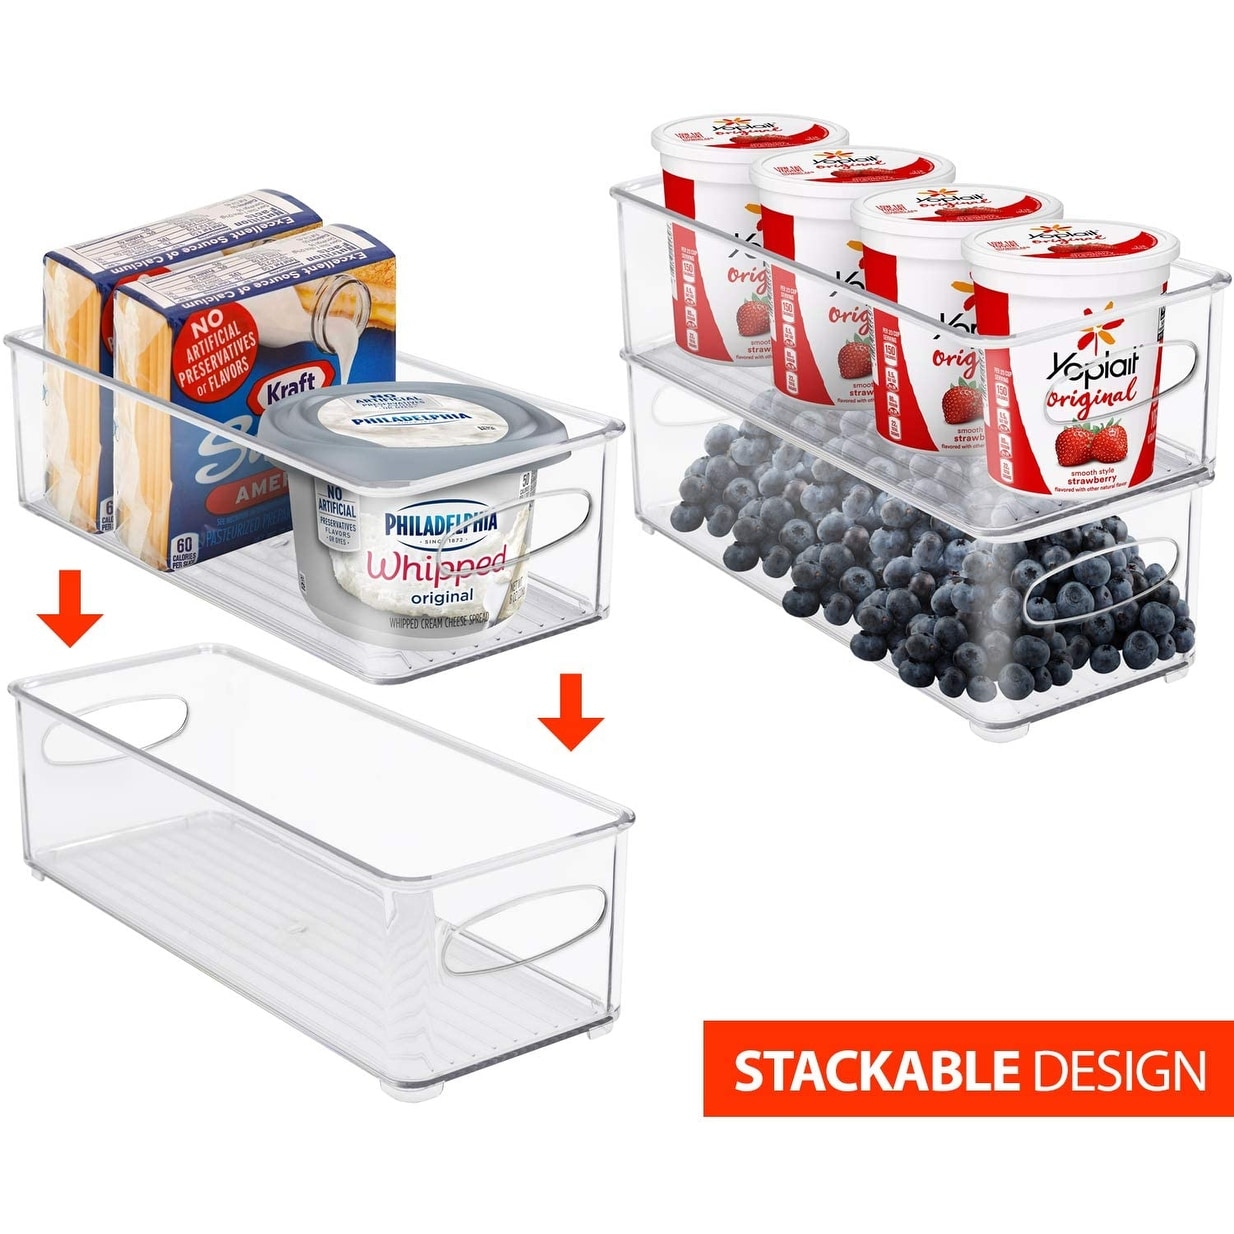 https://ak1.ostkcdn.com/images/products/is/images/direct/c77ca4e91f0ac66db51963e54b87d4833e8f6ca5/Plastic-Storage-Bins-Stackable-Clear-Pantry-Organizer-Box-Containers.jpg